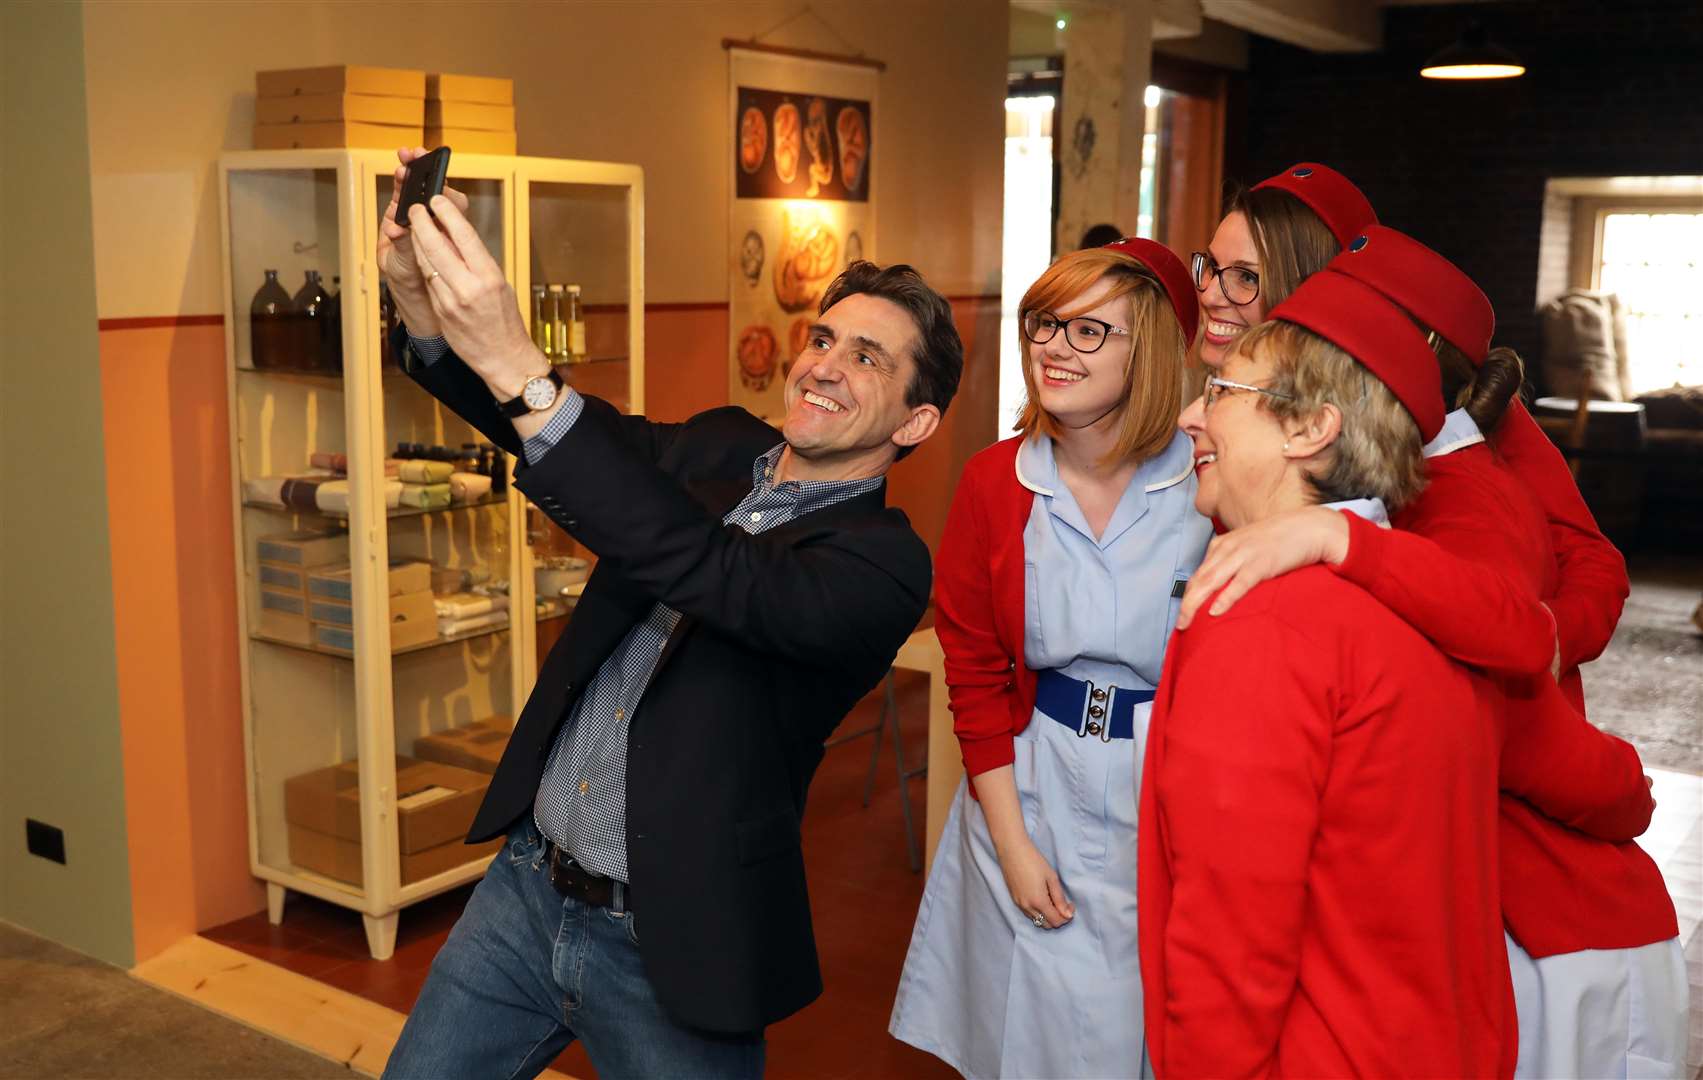 Stephen McGann (Dr Turner) with the Call the Midwife tour guides